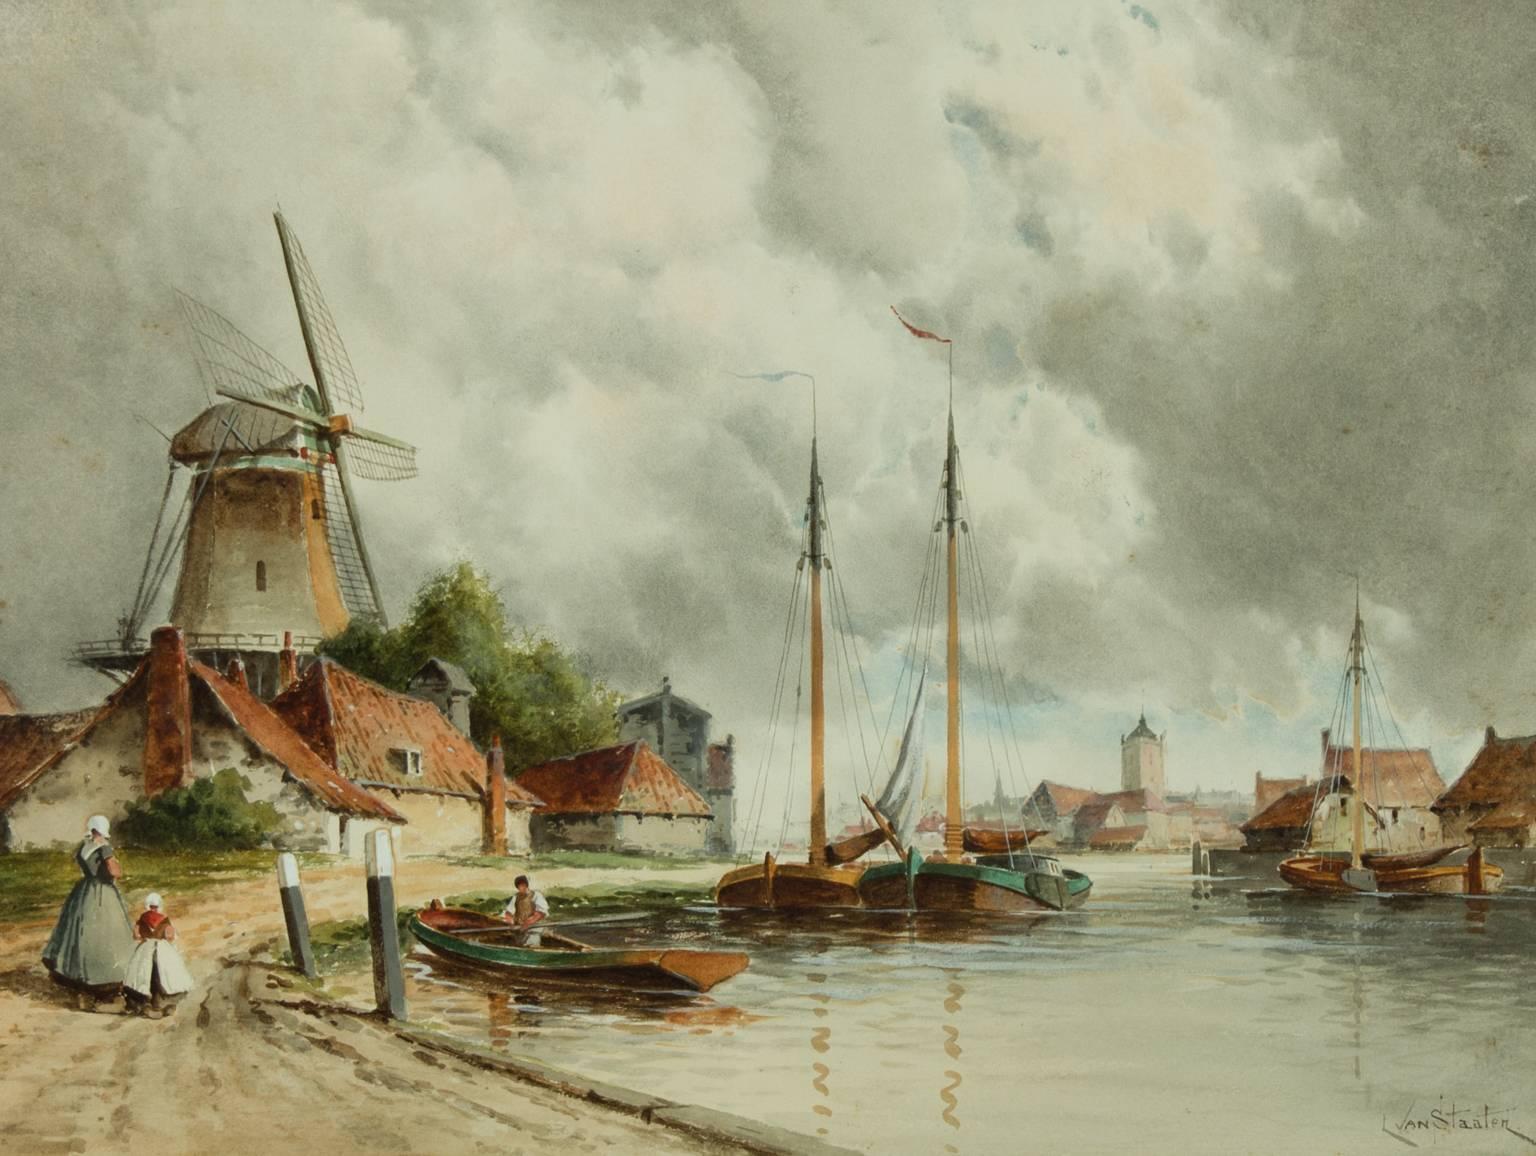 A finely painted mid-late 19th century signed Dutch oil painting, depicting a windmill by a canal. Painted by Louise Van Staaten (1836-1909), also know as Hermanus Koekkoek the Younger. Signed to the lower right and well presented in a black laquer